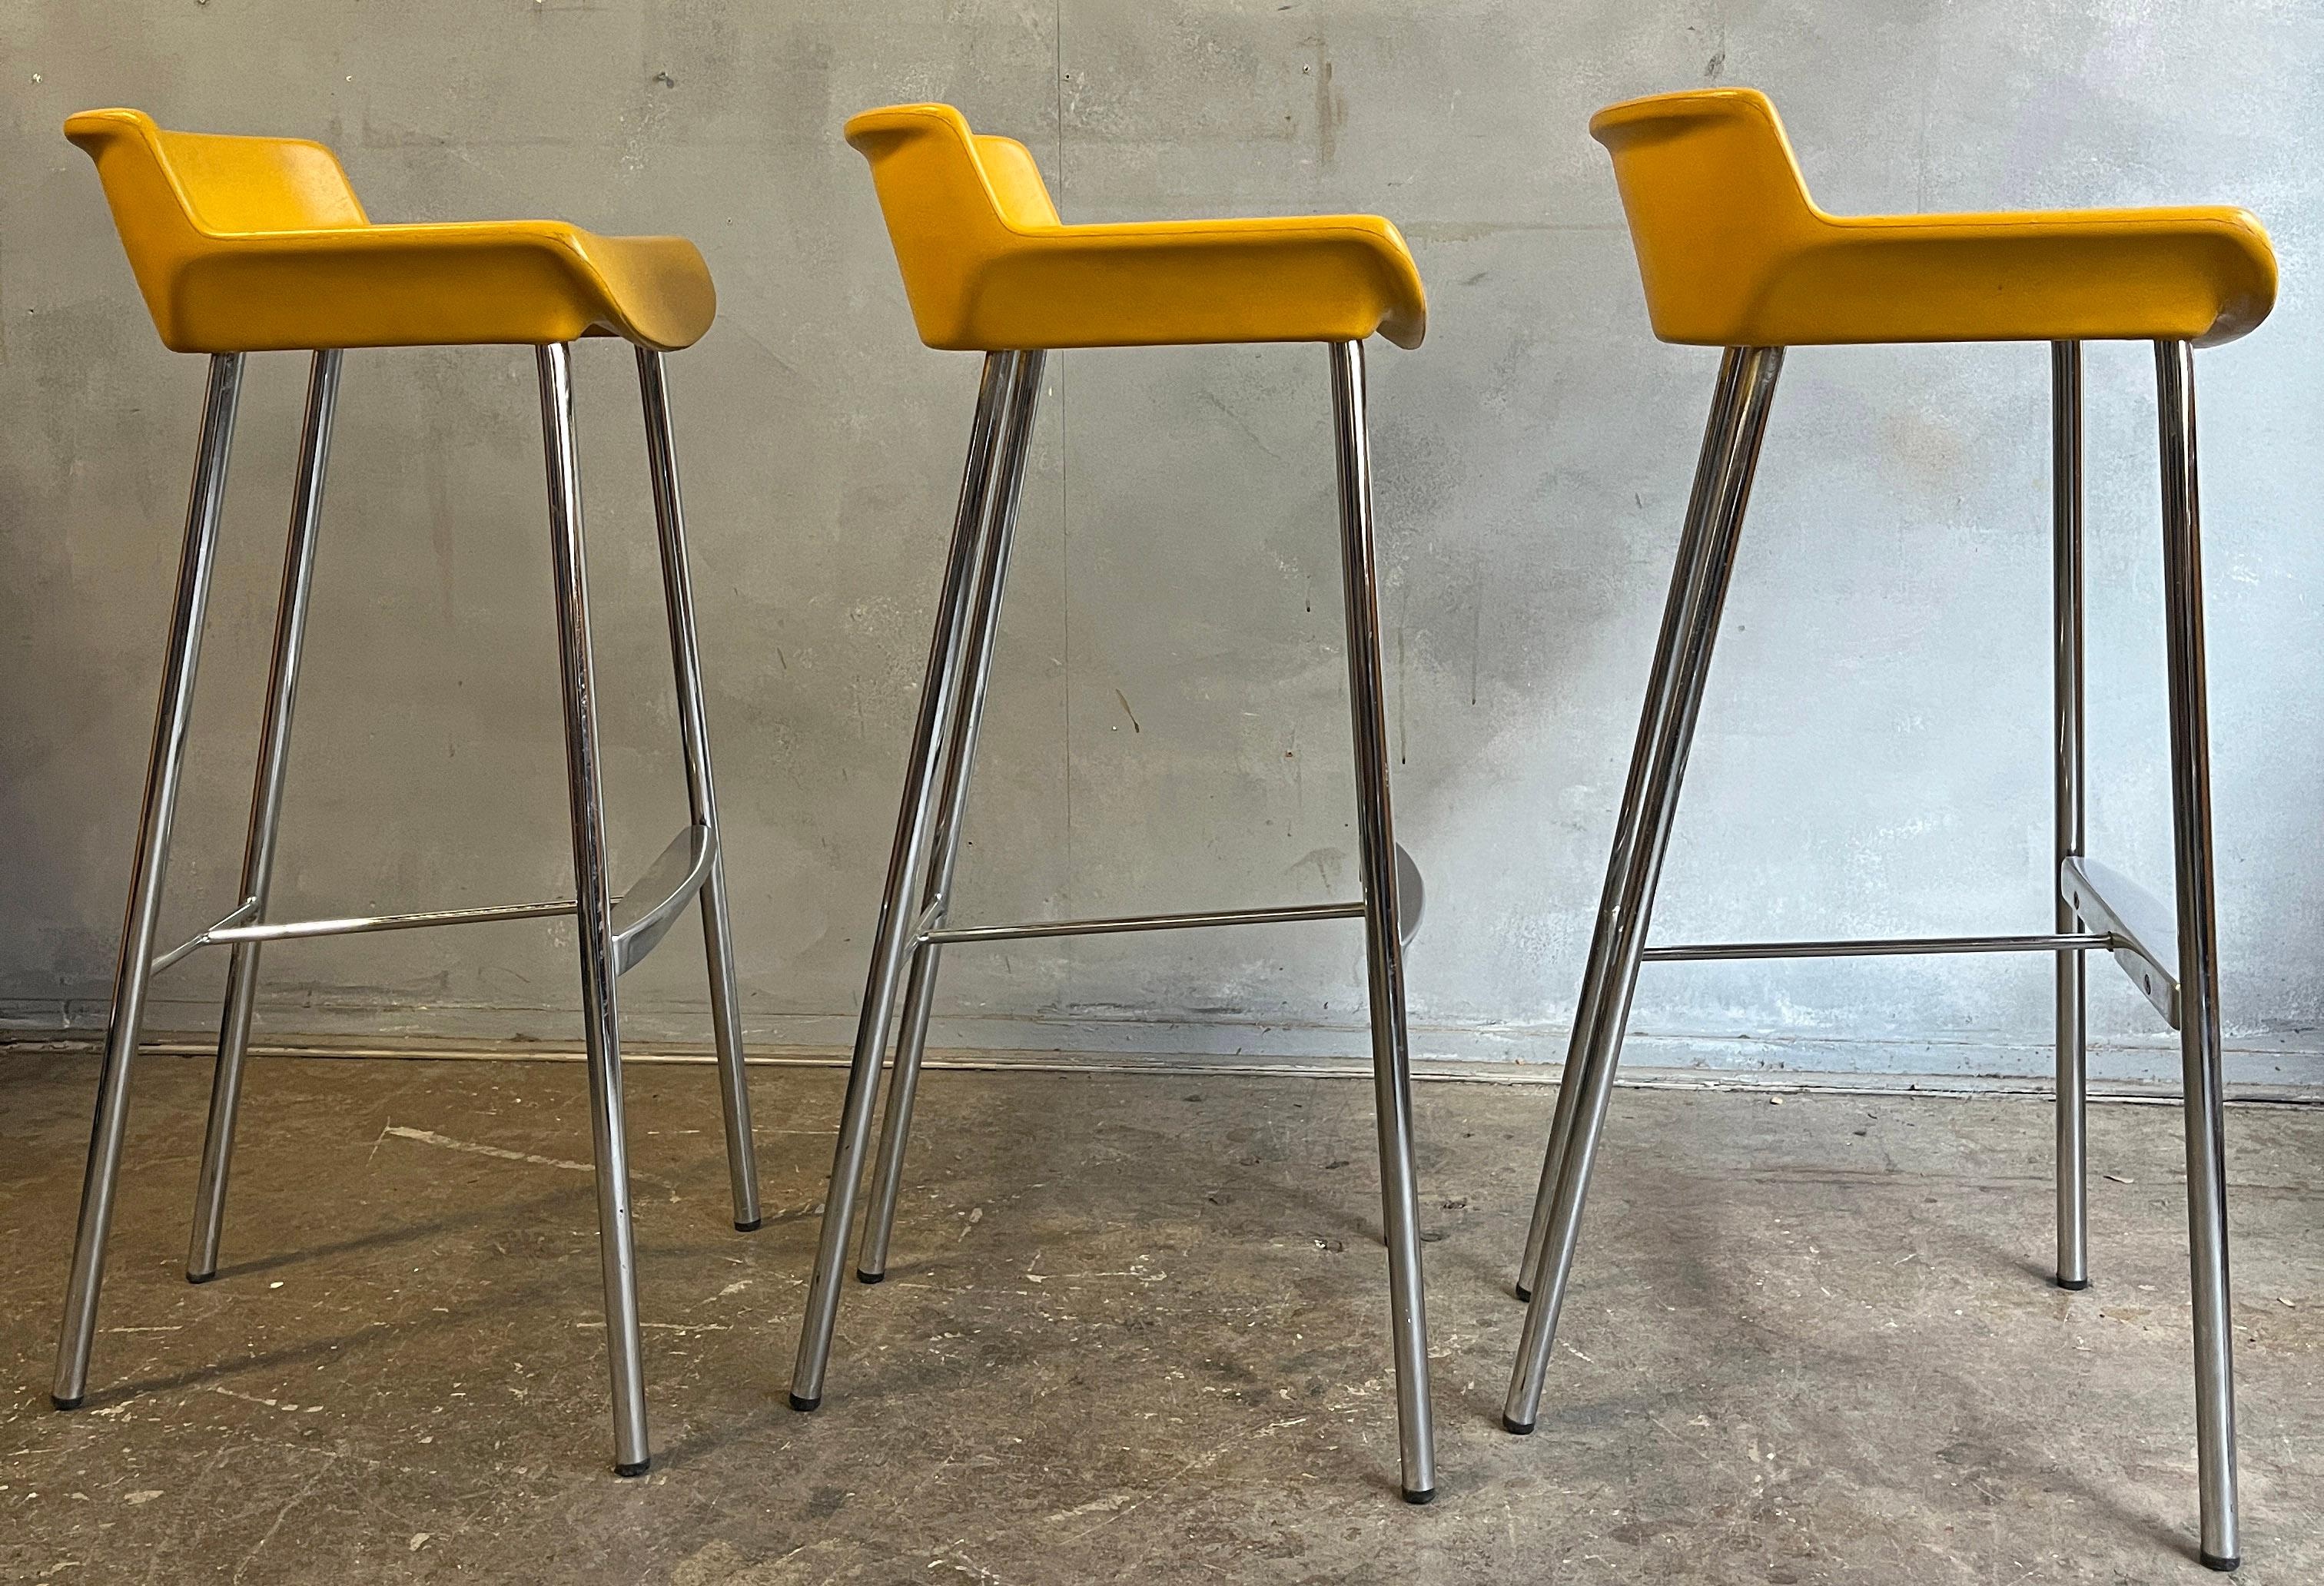 Rarely found stools designed by Jorge Pensi with yellow seat and chromes legs. Post modern / Mid-Century design. We think this is the most beautiful stool ever made. Simple and elegant. Incorporated aluminum foot rest into chrome legs with a modern